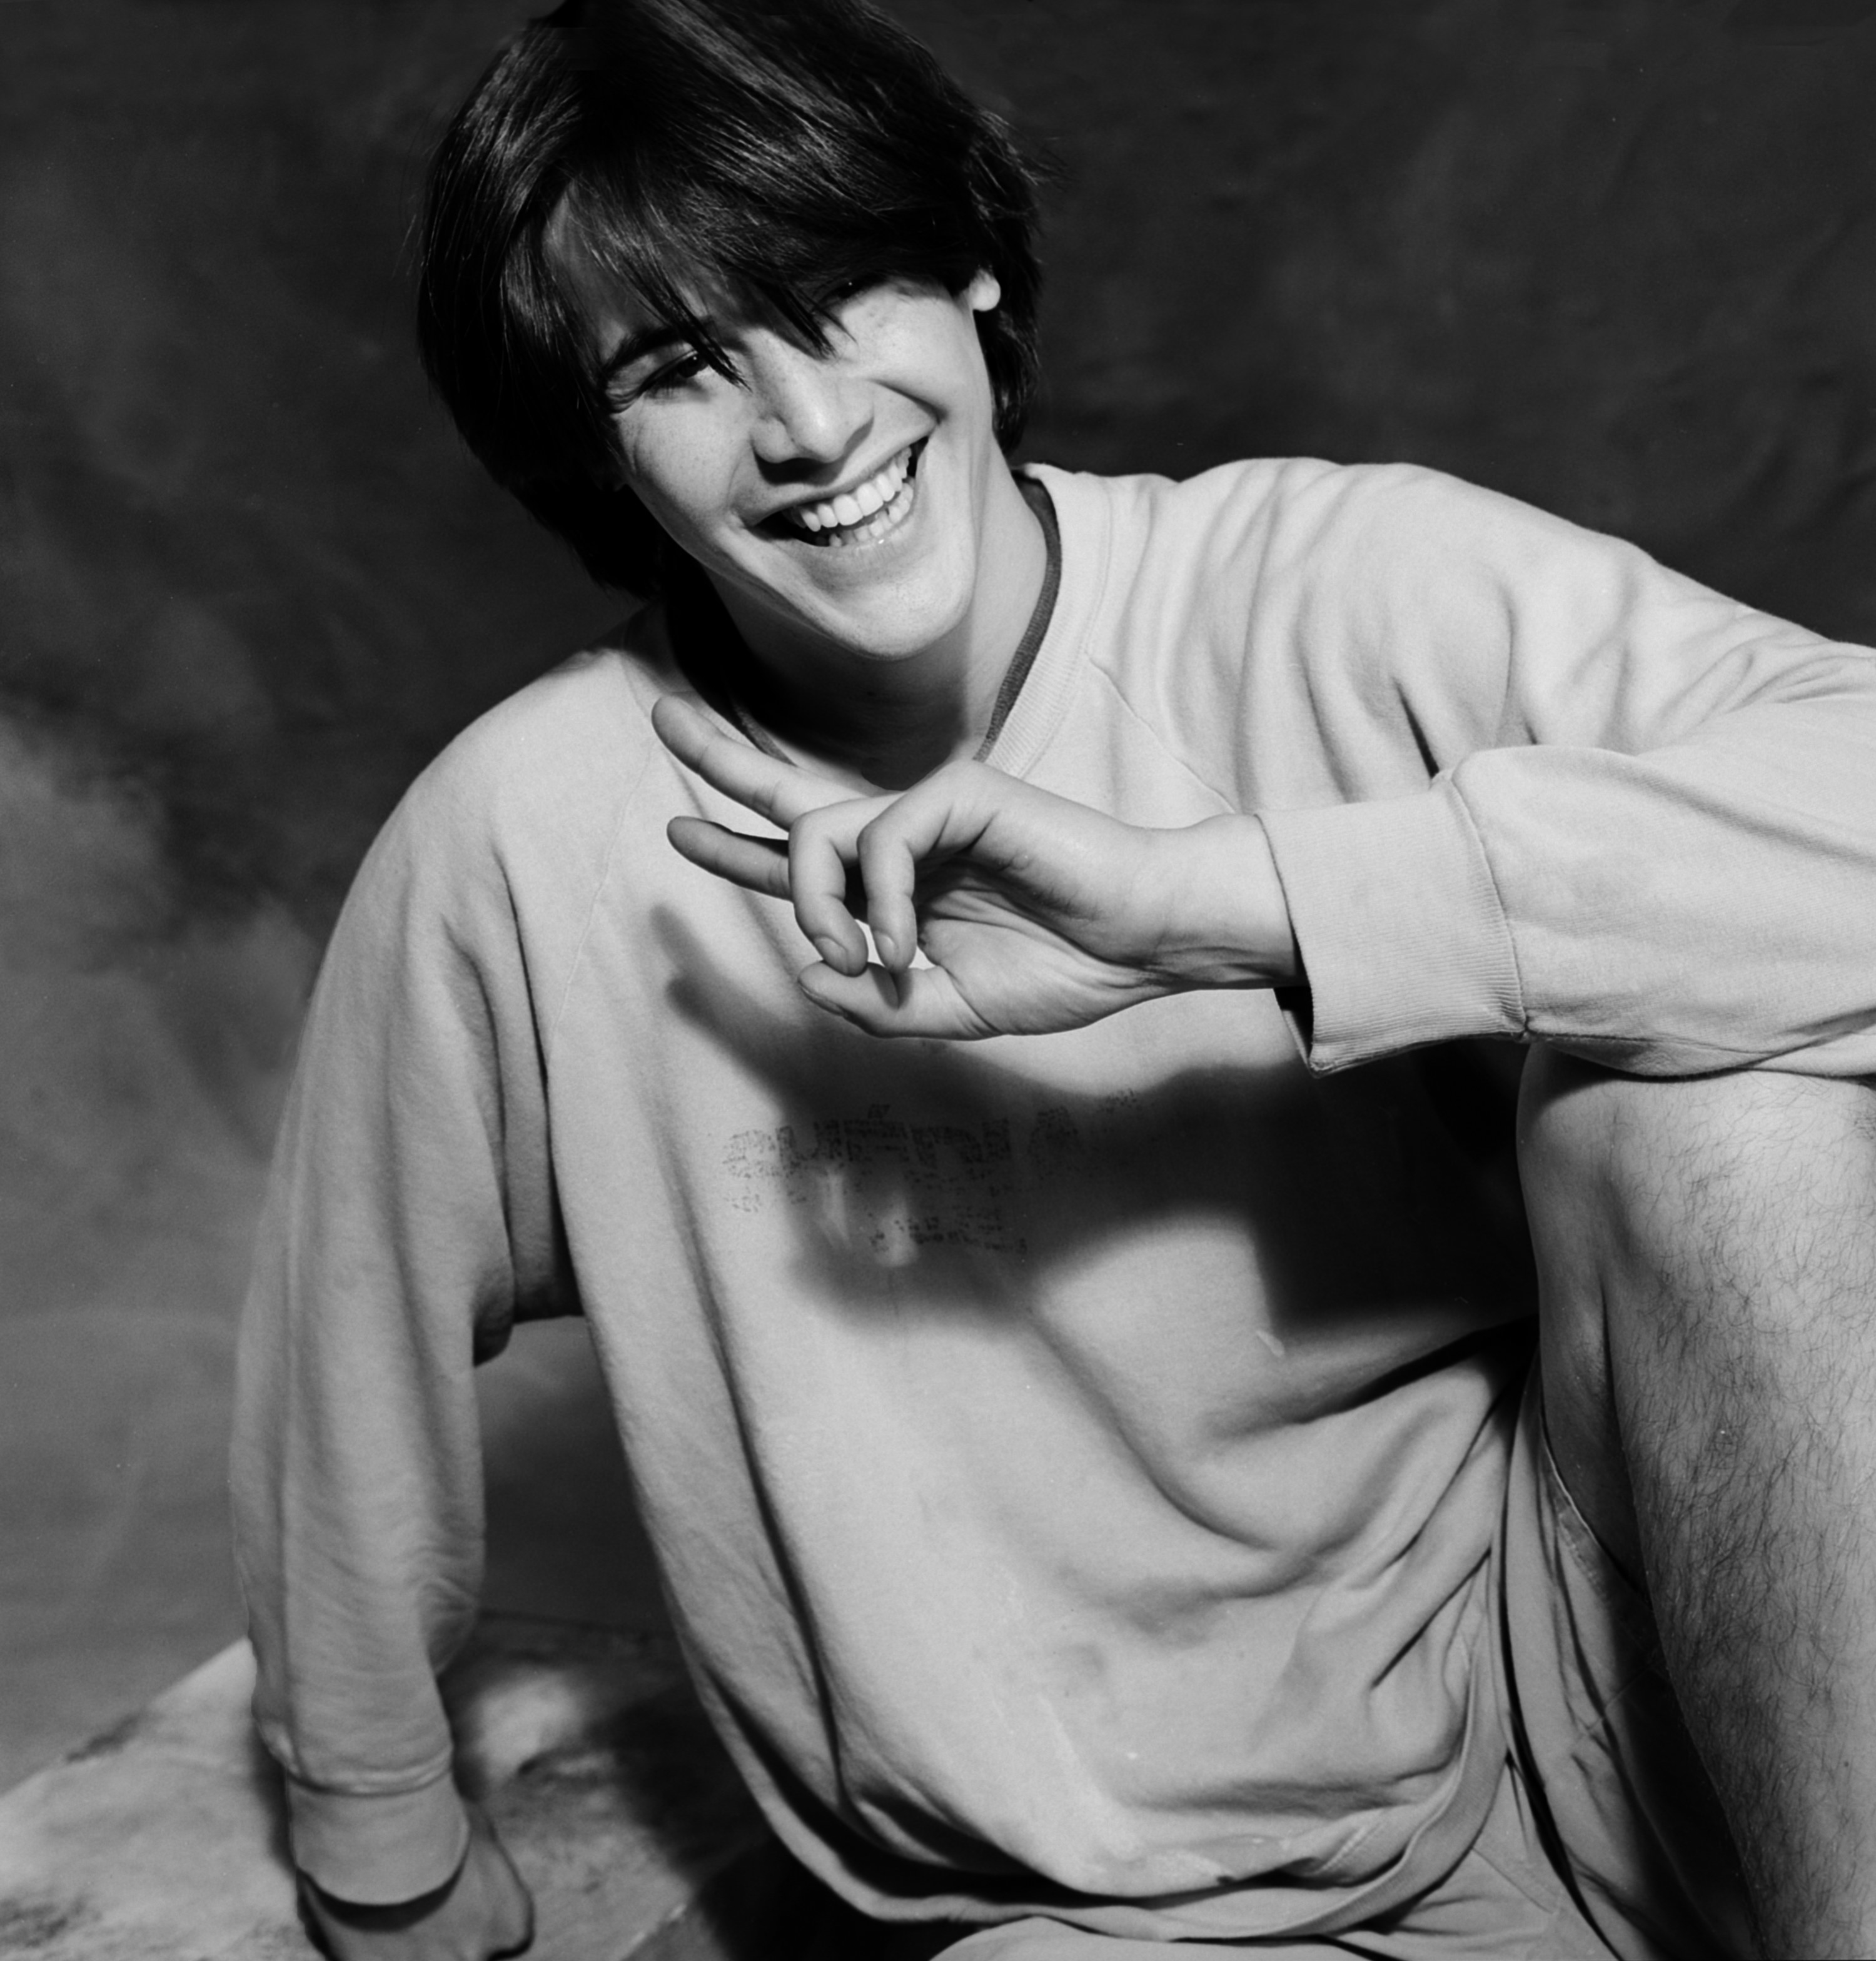 Actor Keanu Reeves poses for a portrait in October 1989 in Los Angeles, California